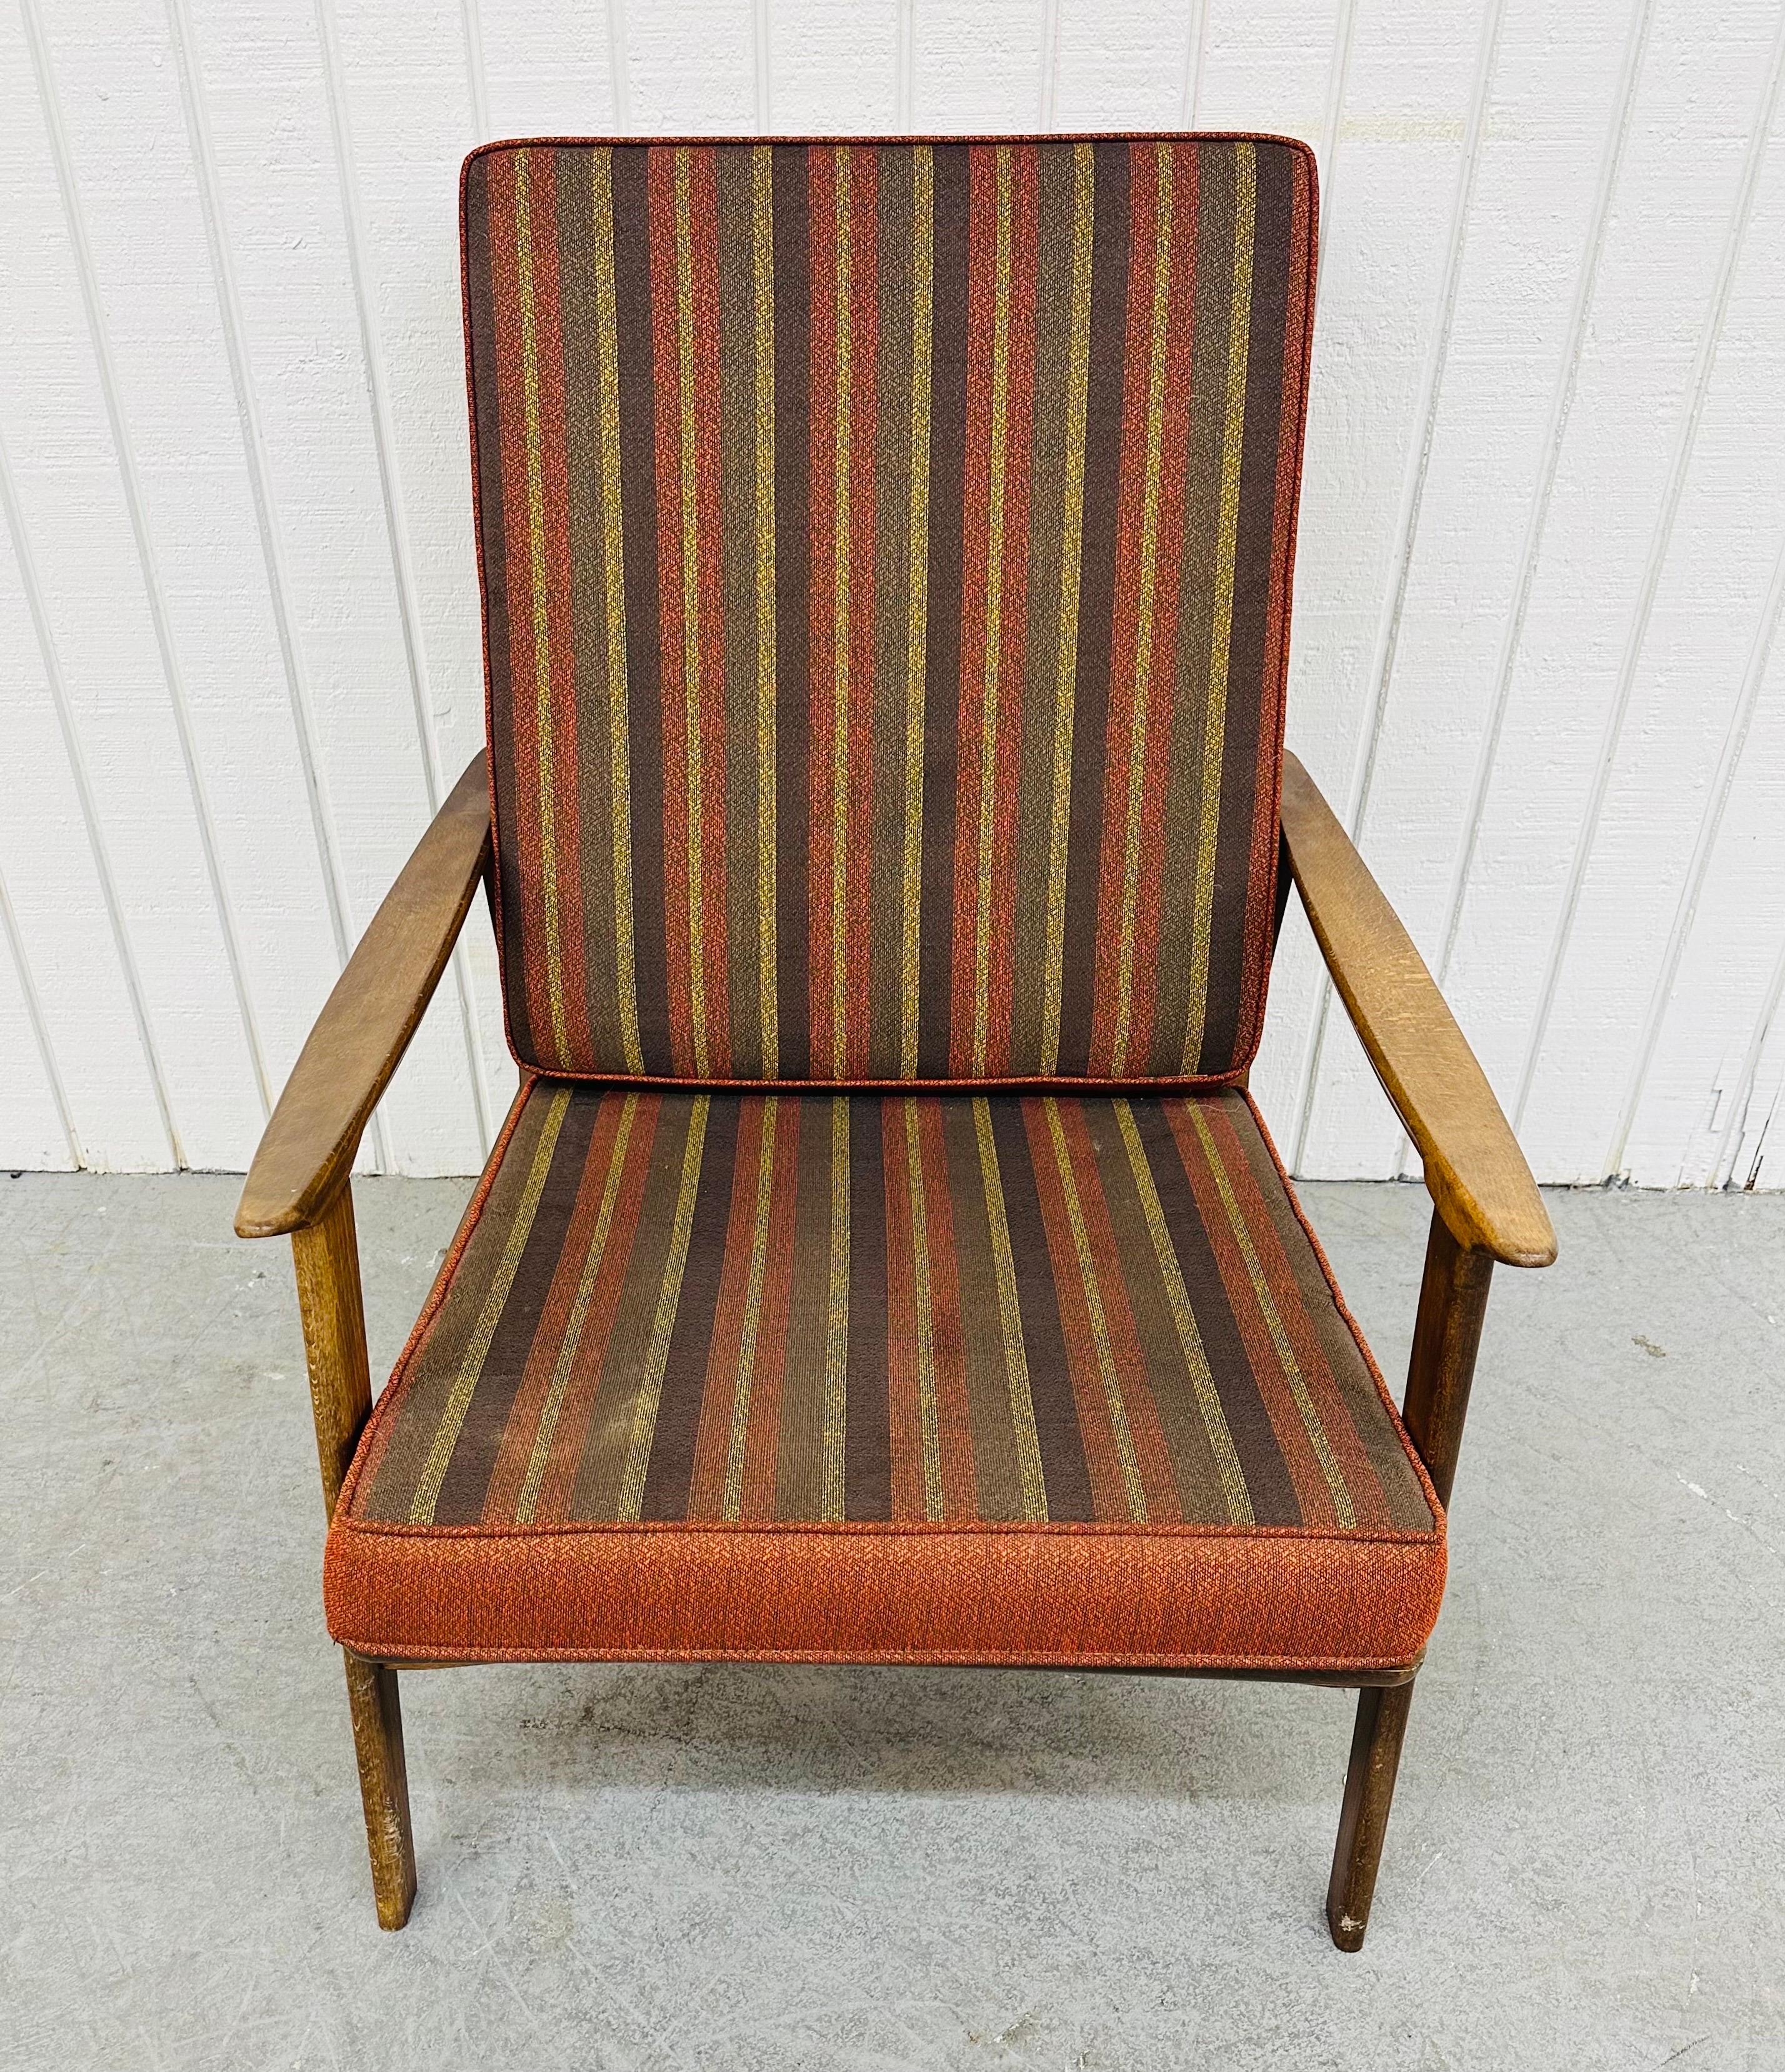 This listing is for a Mid-Century Modern Walnut Lounge Chair. Featuring a straight line walnut designed chair frame, original removable cushions, curved arms, and a beautiful walnut finish. This is an exceptional combination of quality and design!